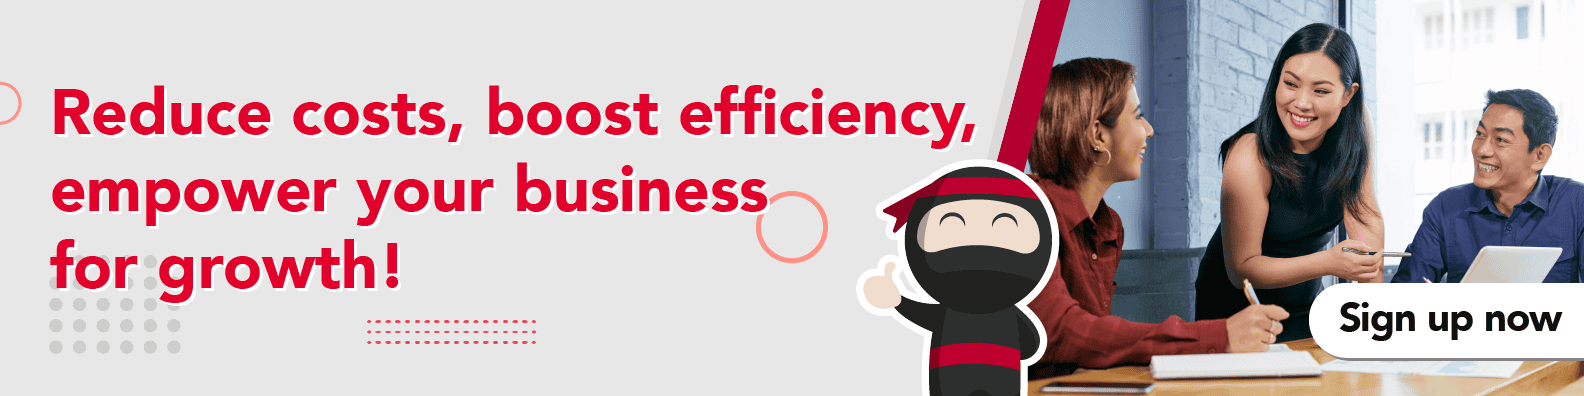 Reduce costs, boost efficiency, empower your business for growth!